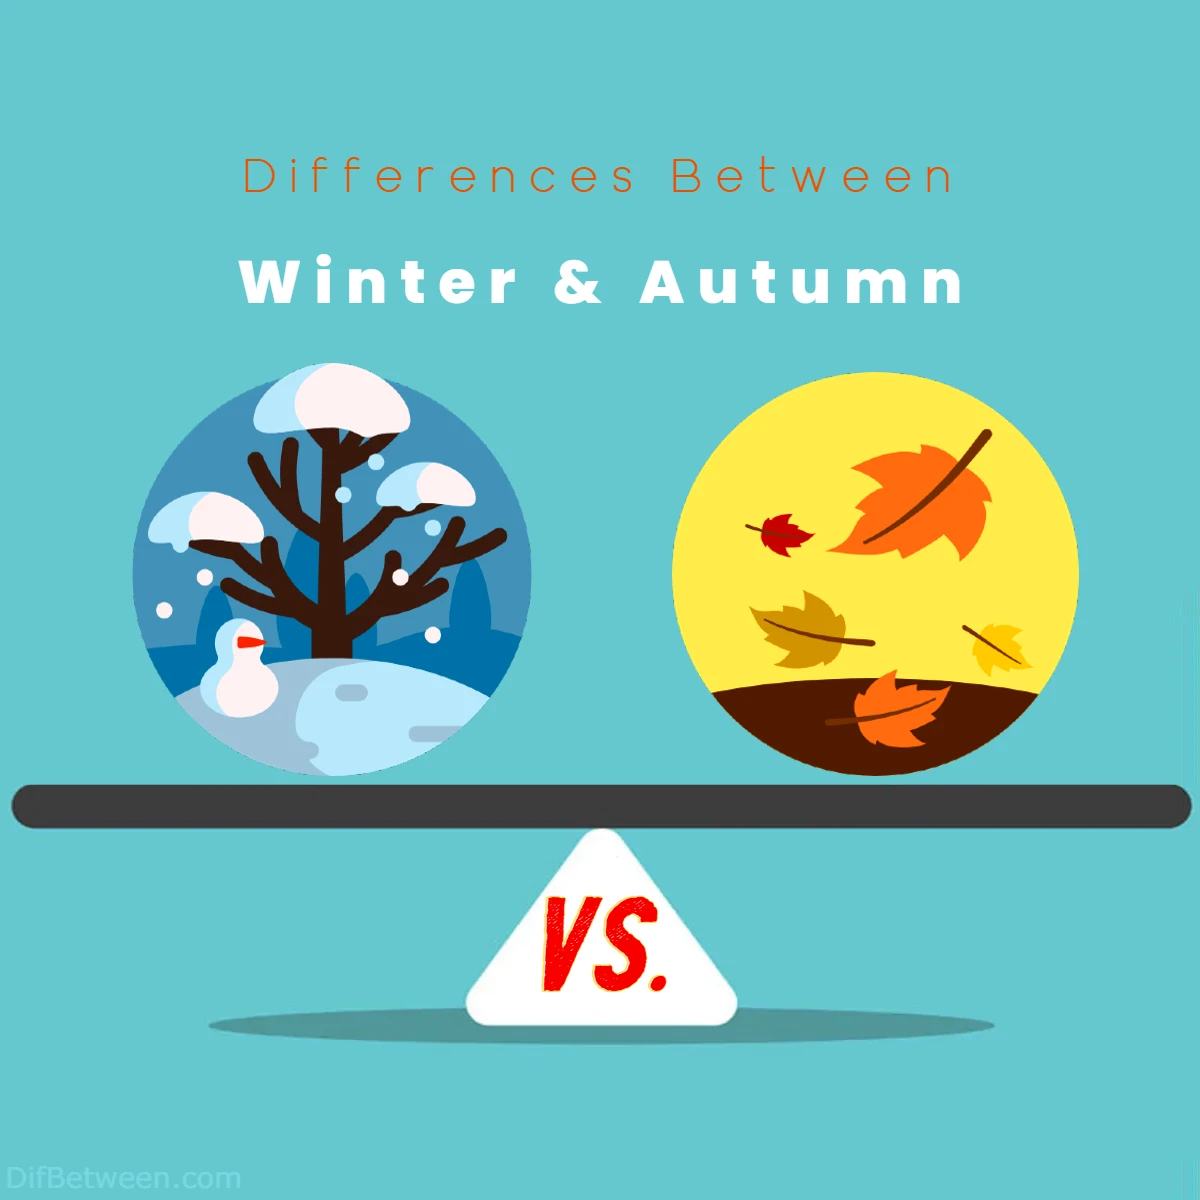 Differences Between Winter vs Autumn